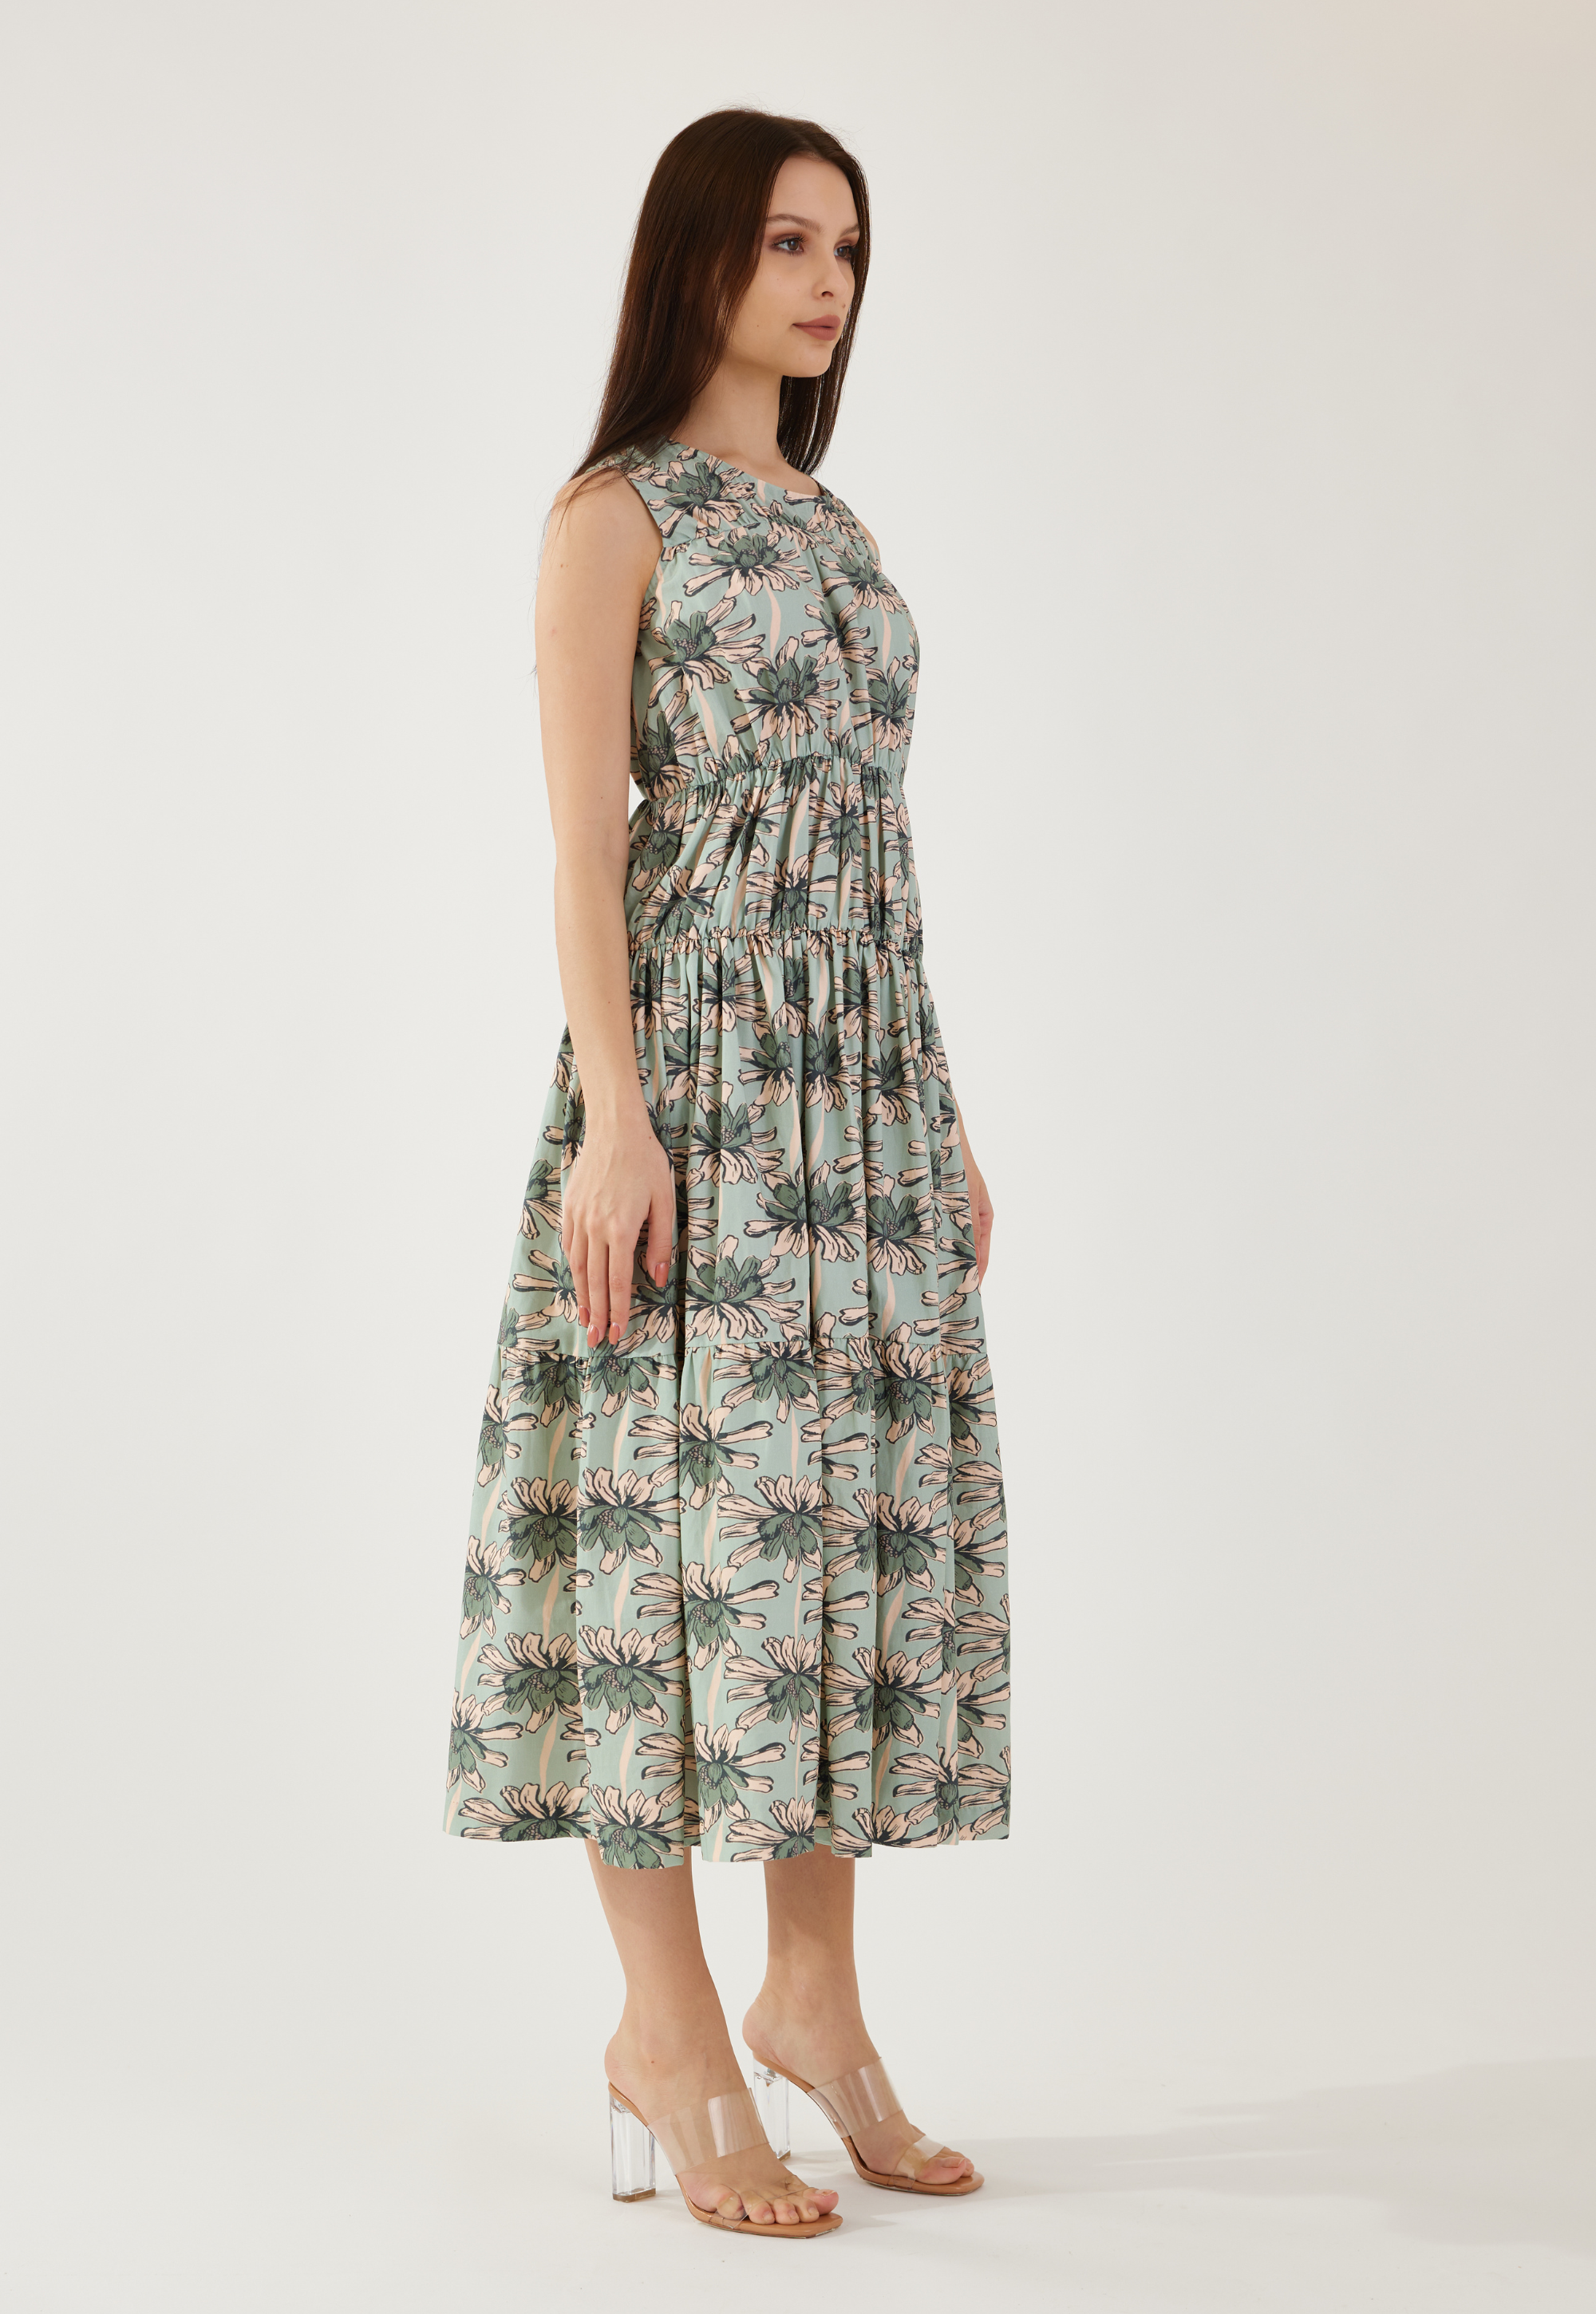 Olive and Green floral sleeveless midi dress